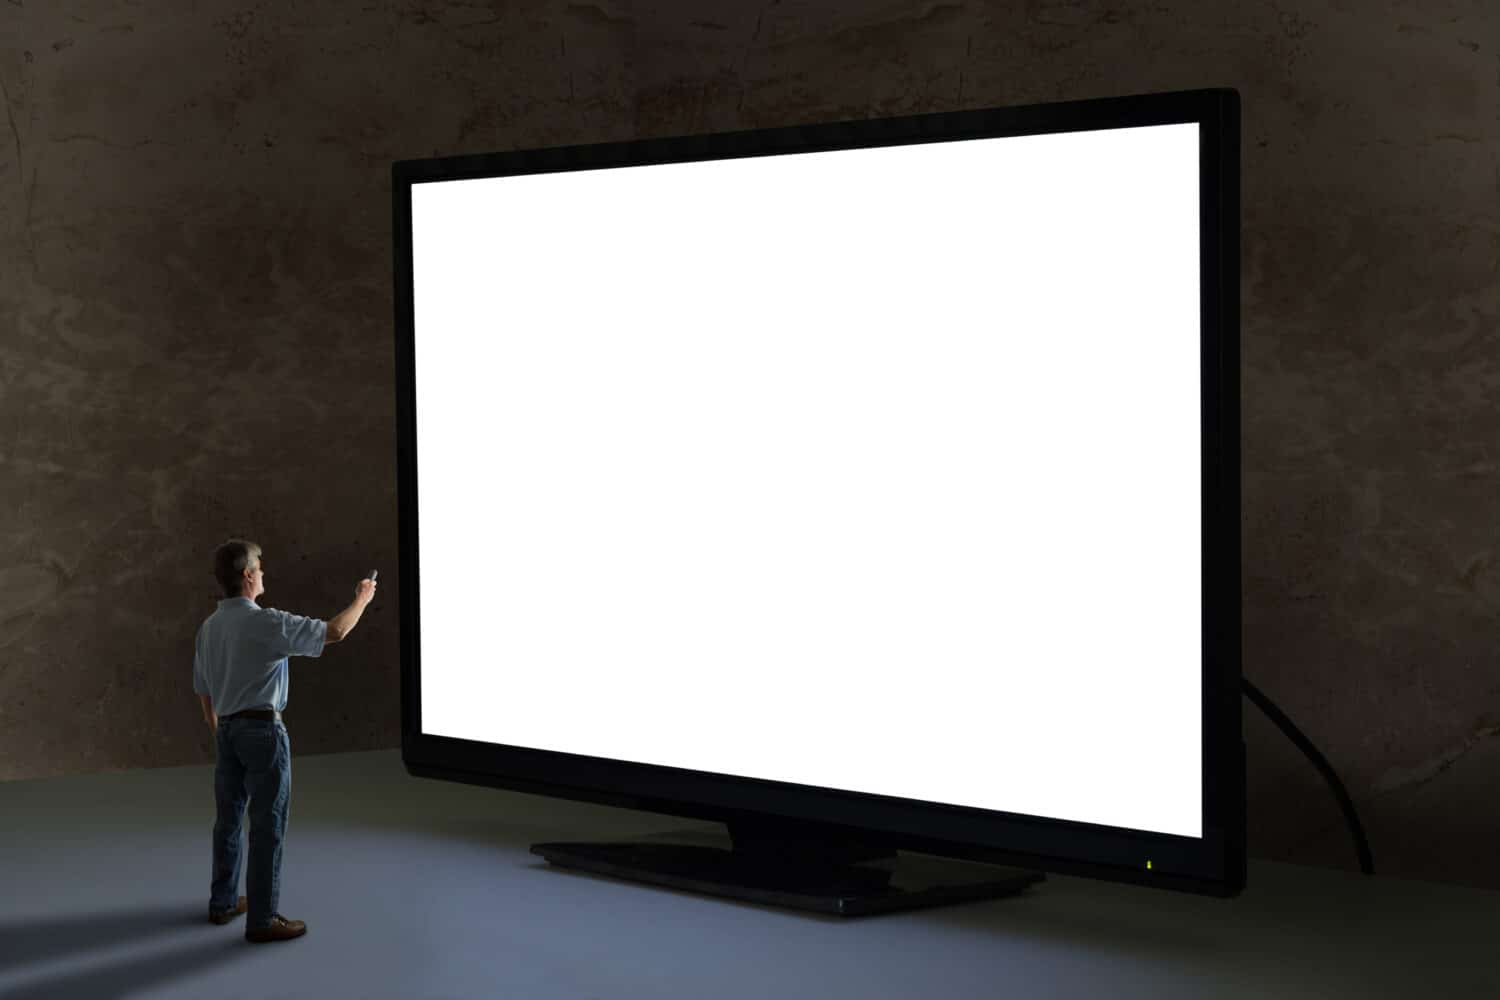 Man pointing tv remote control at world's biggest television towering over him shining bright light in a dimly lit room with clean blank screen for your message and image sending a powerful message